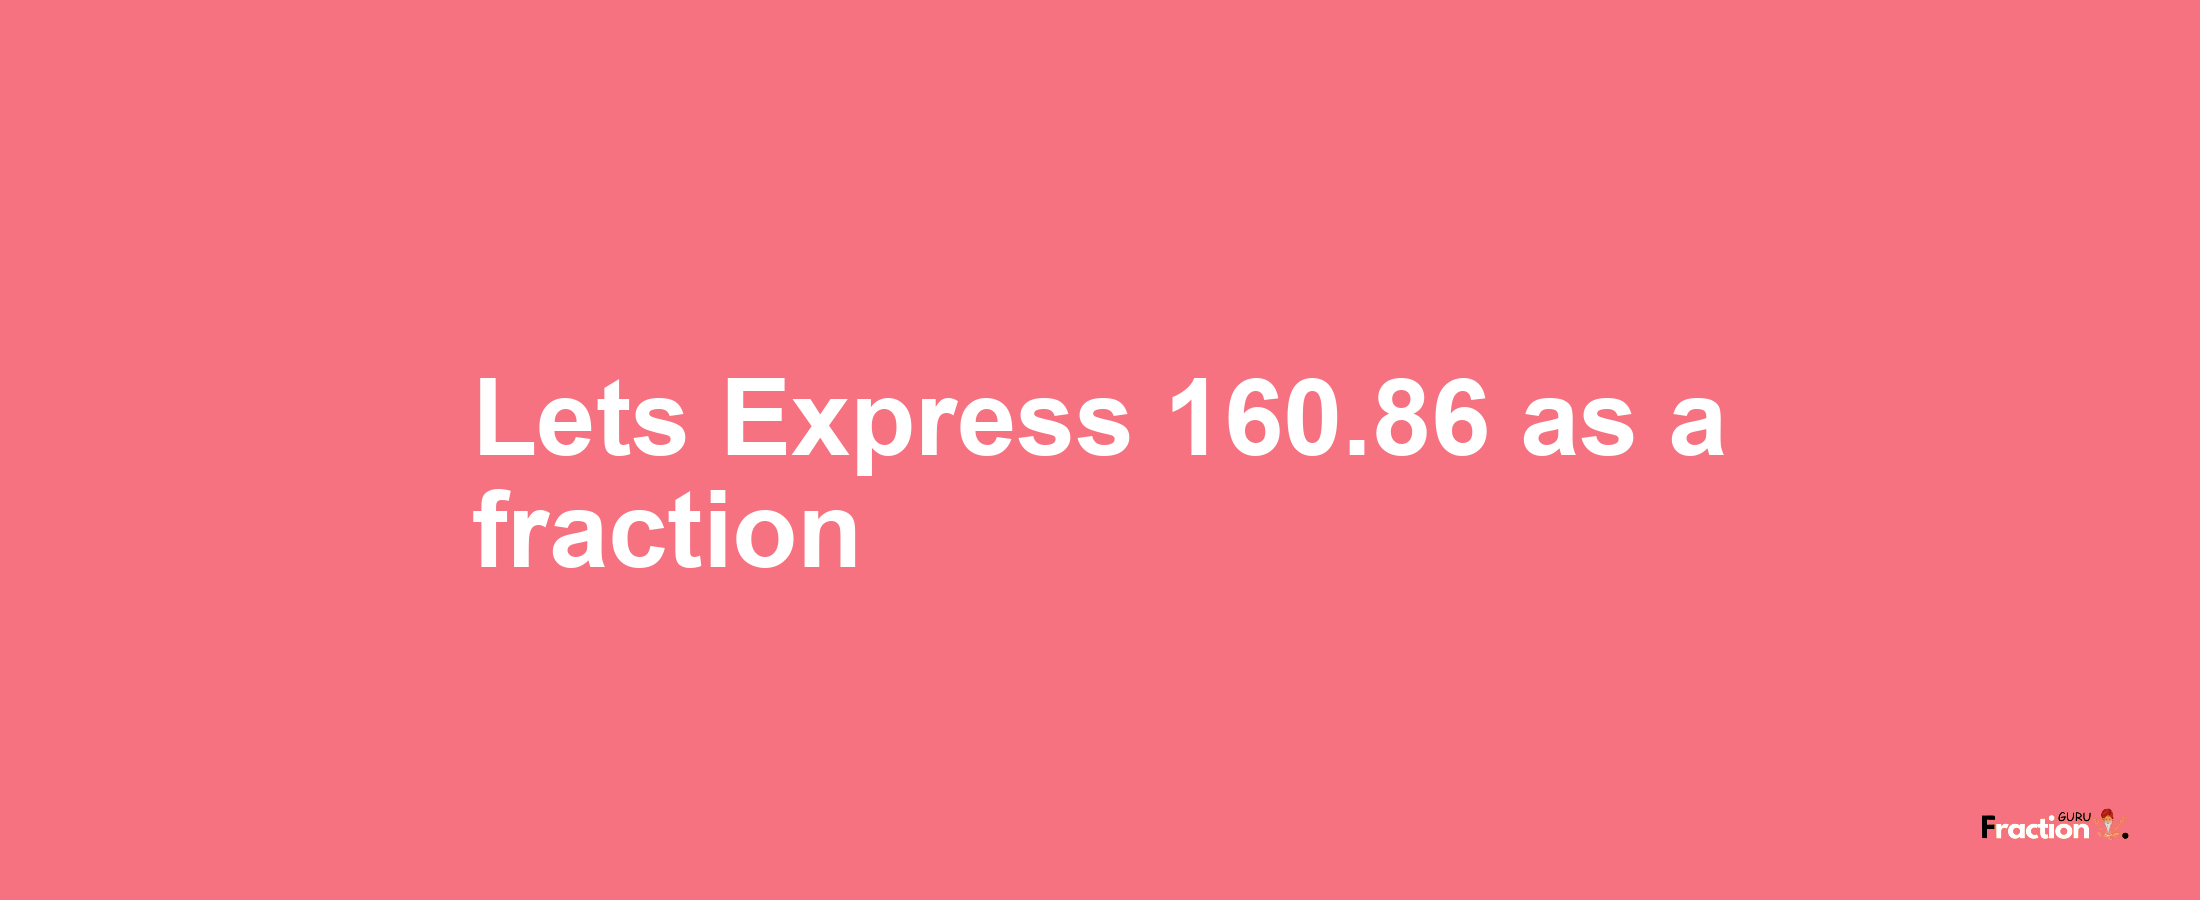 Lets Express 160.86 as afraction